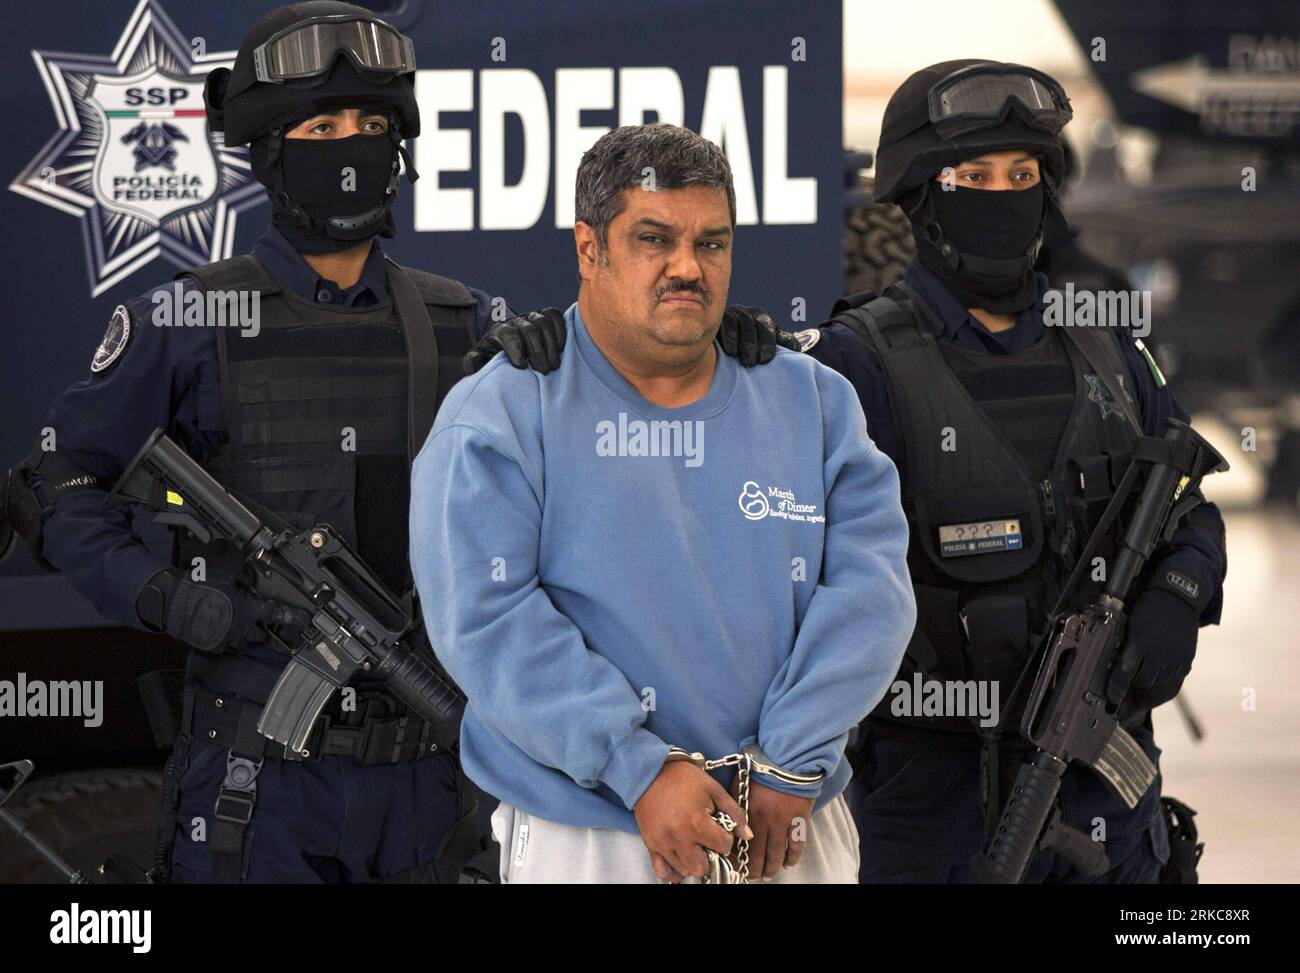 Bildnummer: 54698052  Datum: 02.12.2010  Copyright: imago/Xinhua (101202) -- MEXICO CITY, Dec. 2, 2010 (Xinhua) -- Eduardo Ramirez Valencia, also known as El Profe (the teacher), who is alleged the Los Zetas drug cartel leader in the Hidalgo state, is presented by the Mexican federal police during a press conference at the federal police headquarters in Mexico City, capital of Mexico, Dec. 2, 2010.   states of Hidalgo, Veracruz and Tamaulipas. (Xinhua/Bernardo Montoya) (wjd) MEXICO-DRUG TRAFFICKING-ARREST PUBLICATIONxNOTxINxCHN People Gesellschaft Kriminalität Drogenkartell Bandenchef Drogenbo Stock Photo